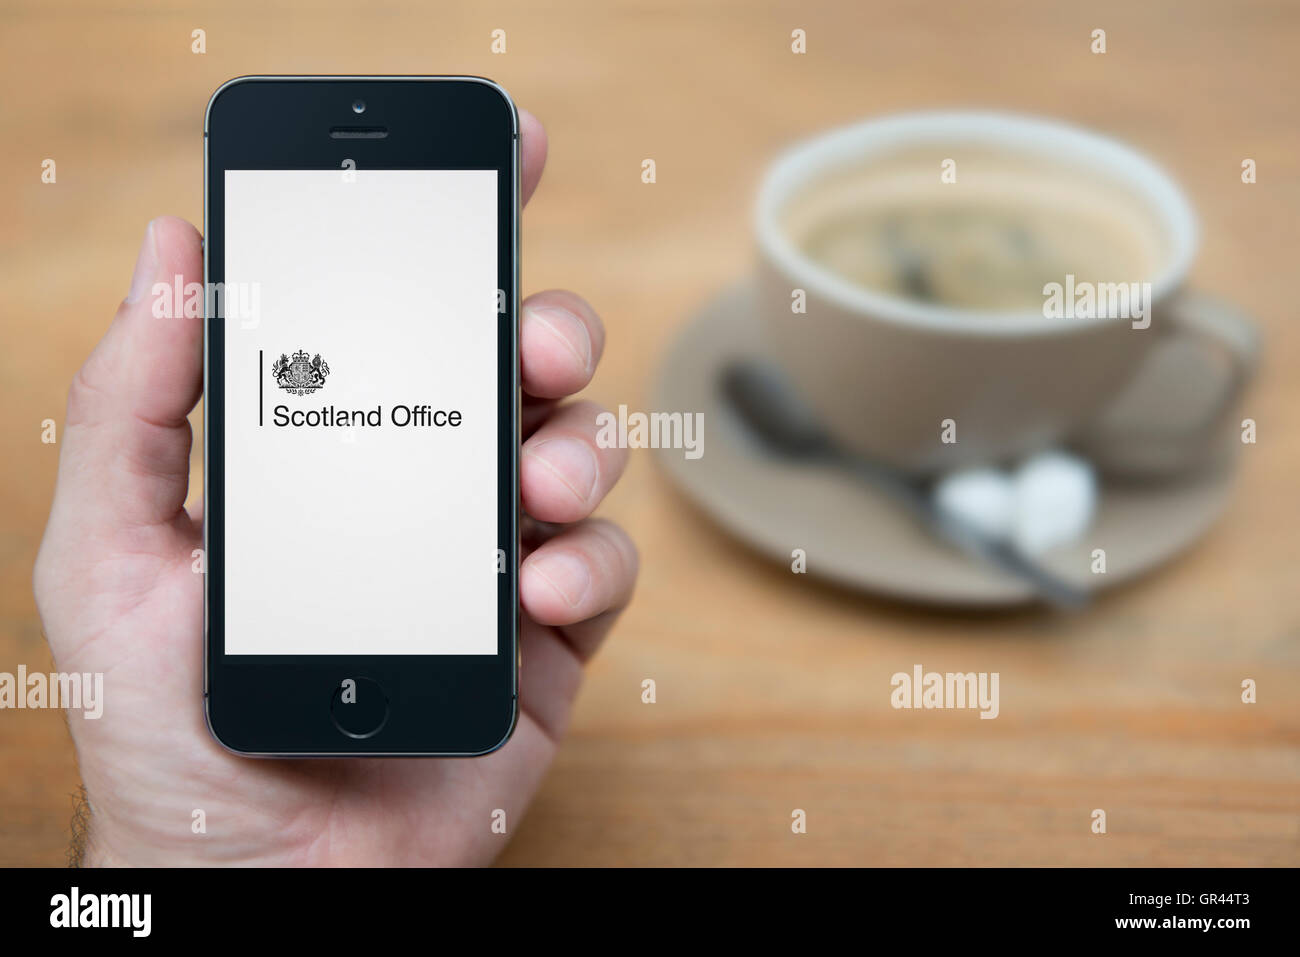 A man looks at his iPhone which displays the UK Government Scotland Office logo crest (Editorial use only). Stock Photo